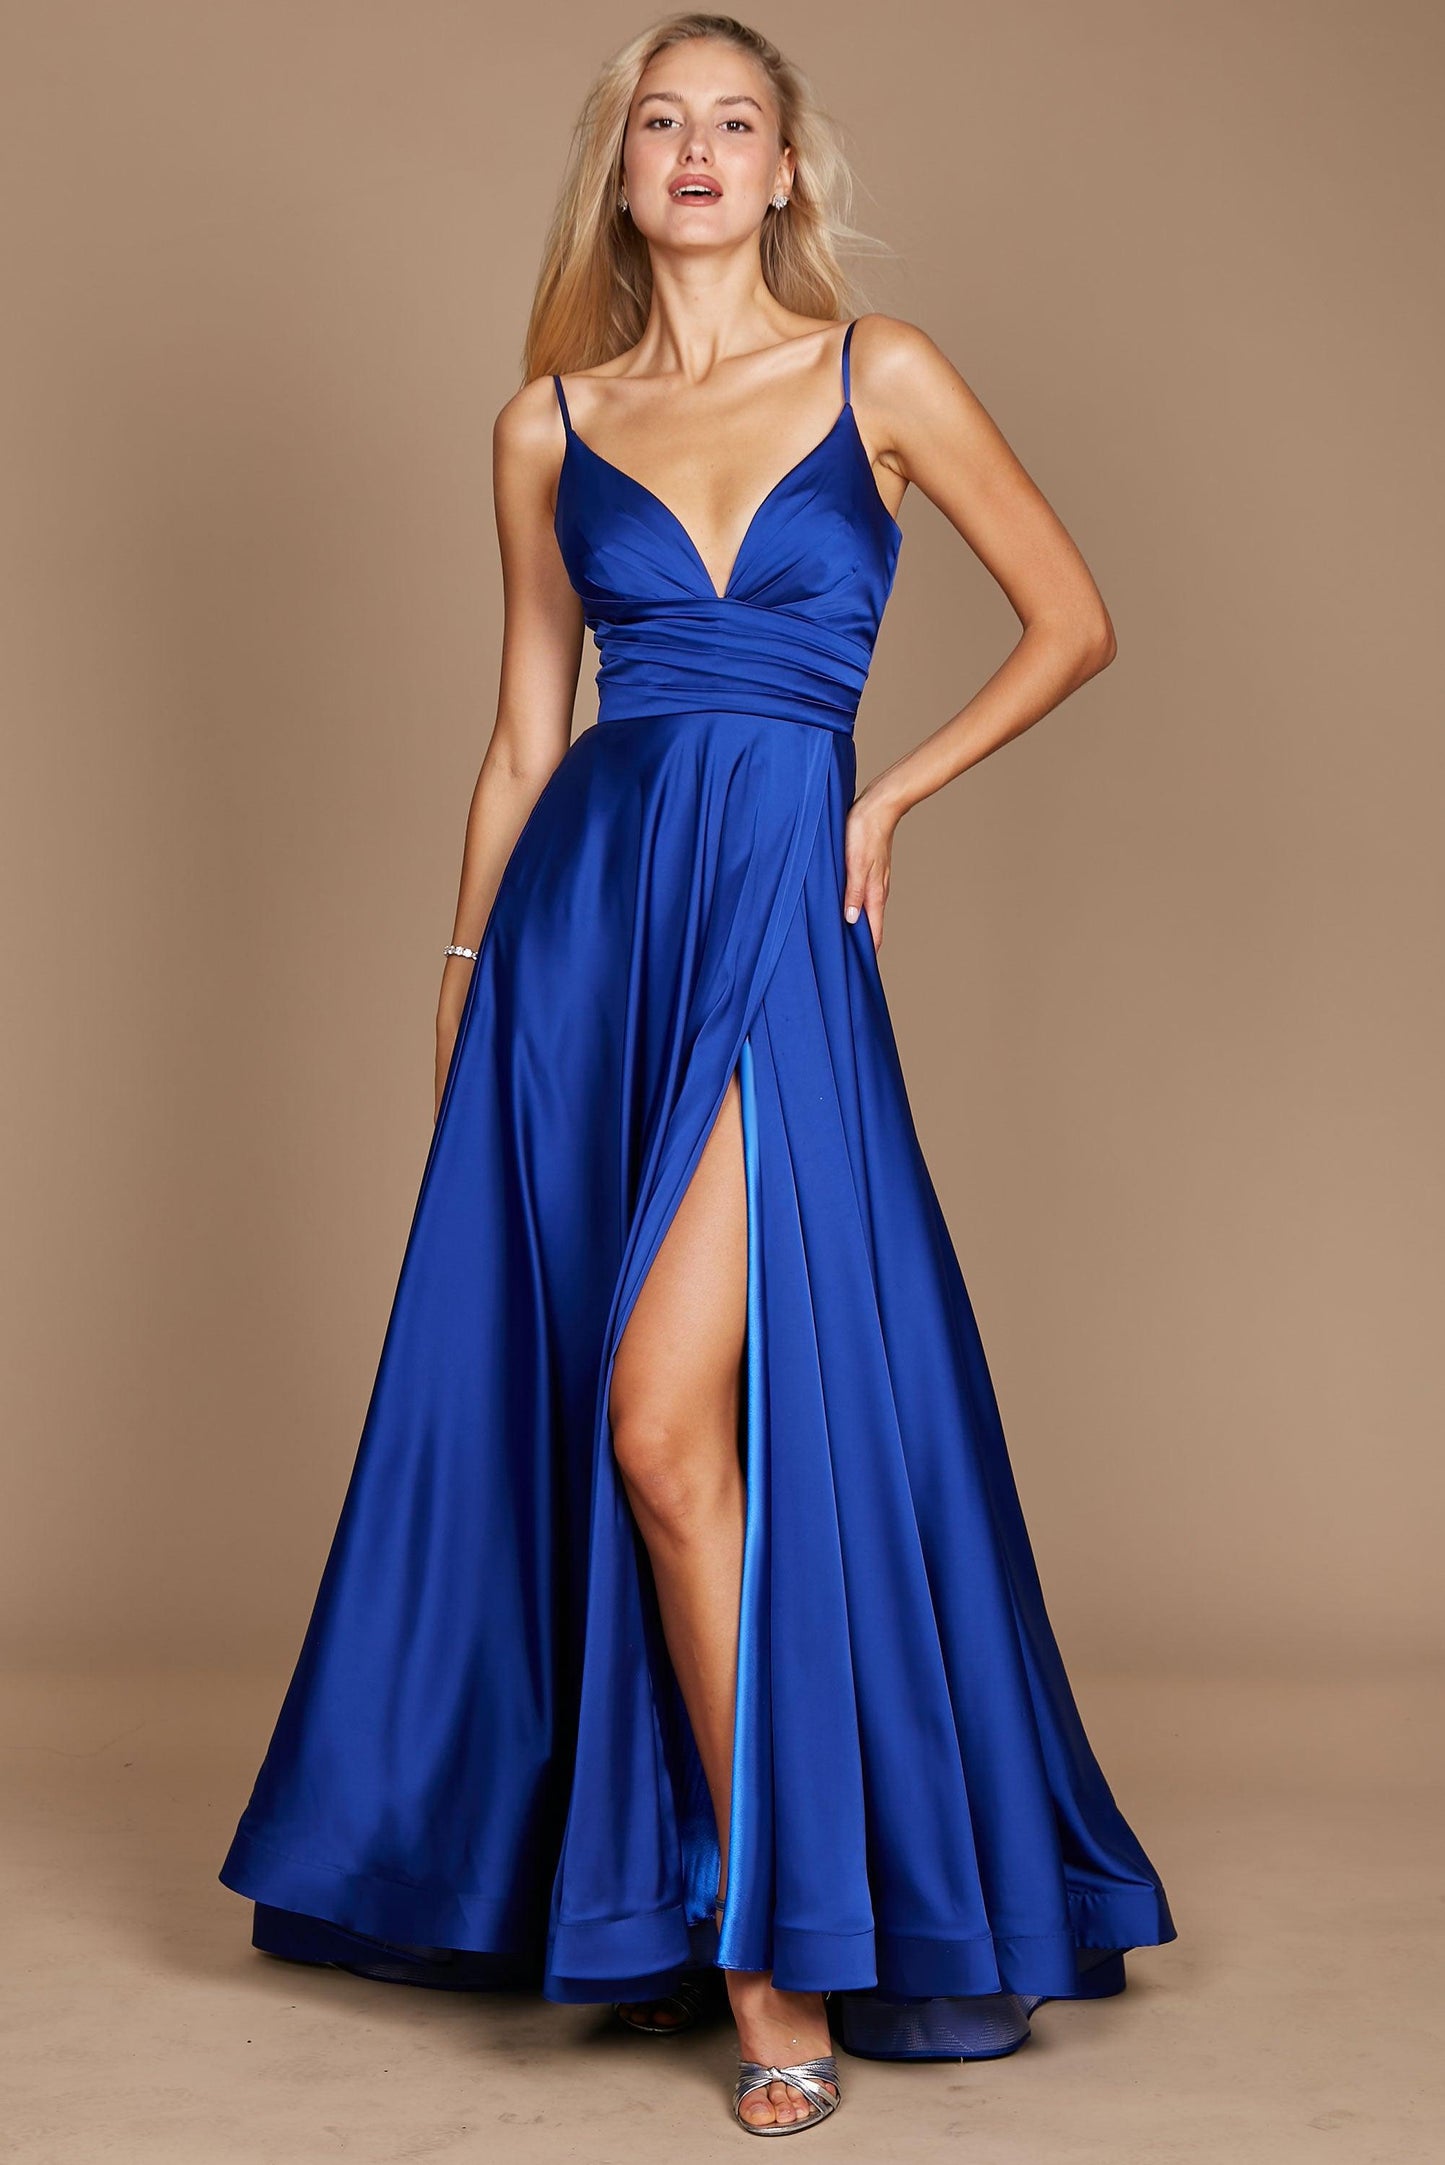 Prom Dresses Long Spaghetti Strap Prom Formal Gown Royal